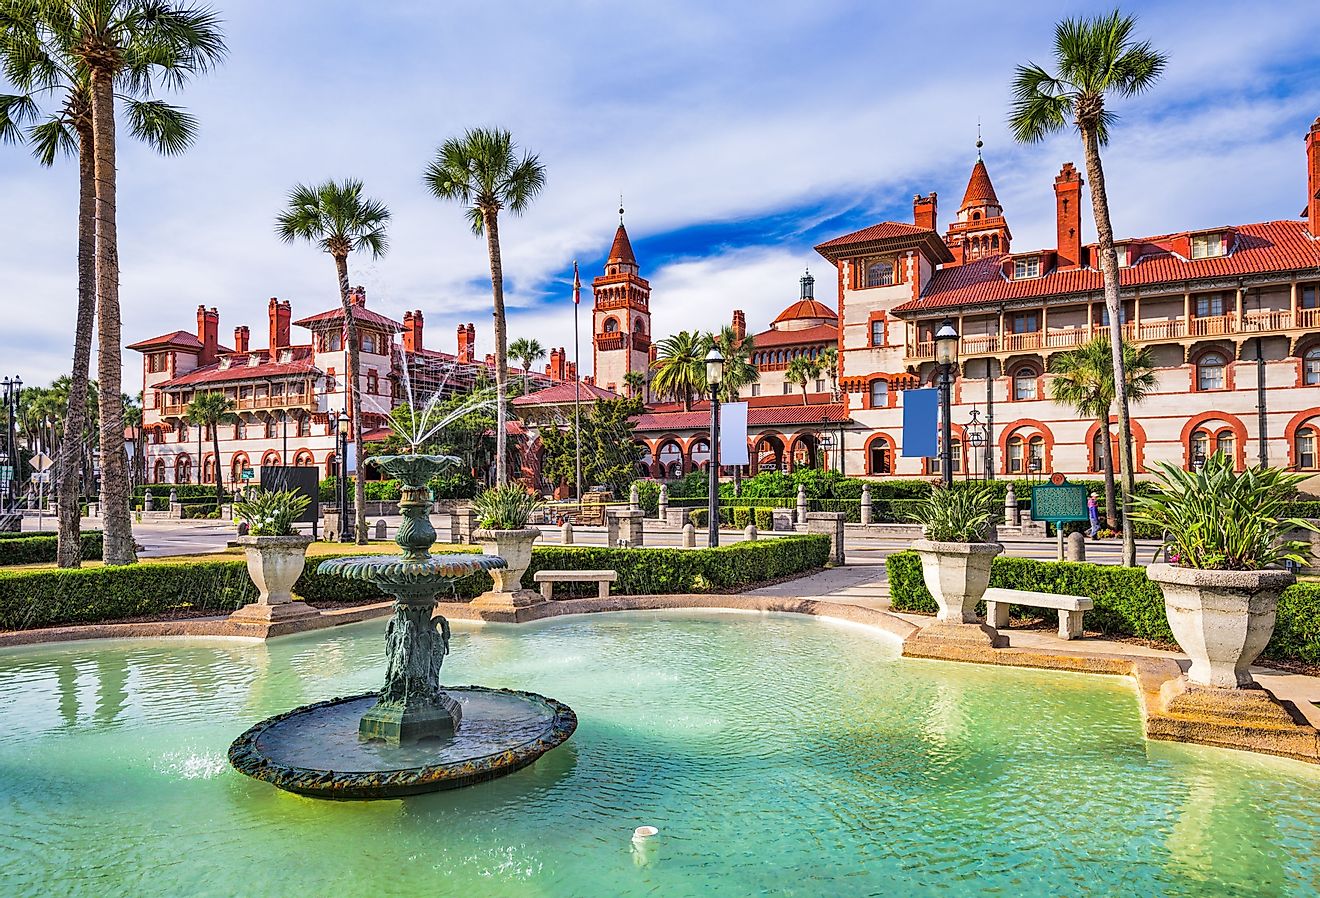 St. Augustine, Florida, town square and fountain.